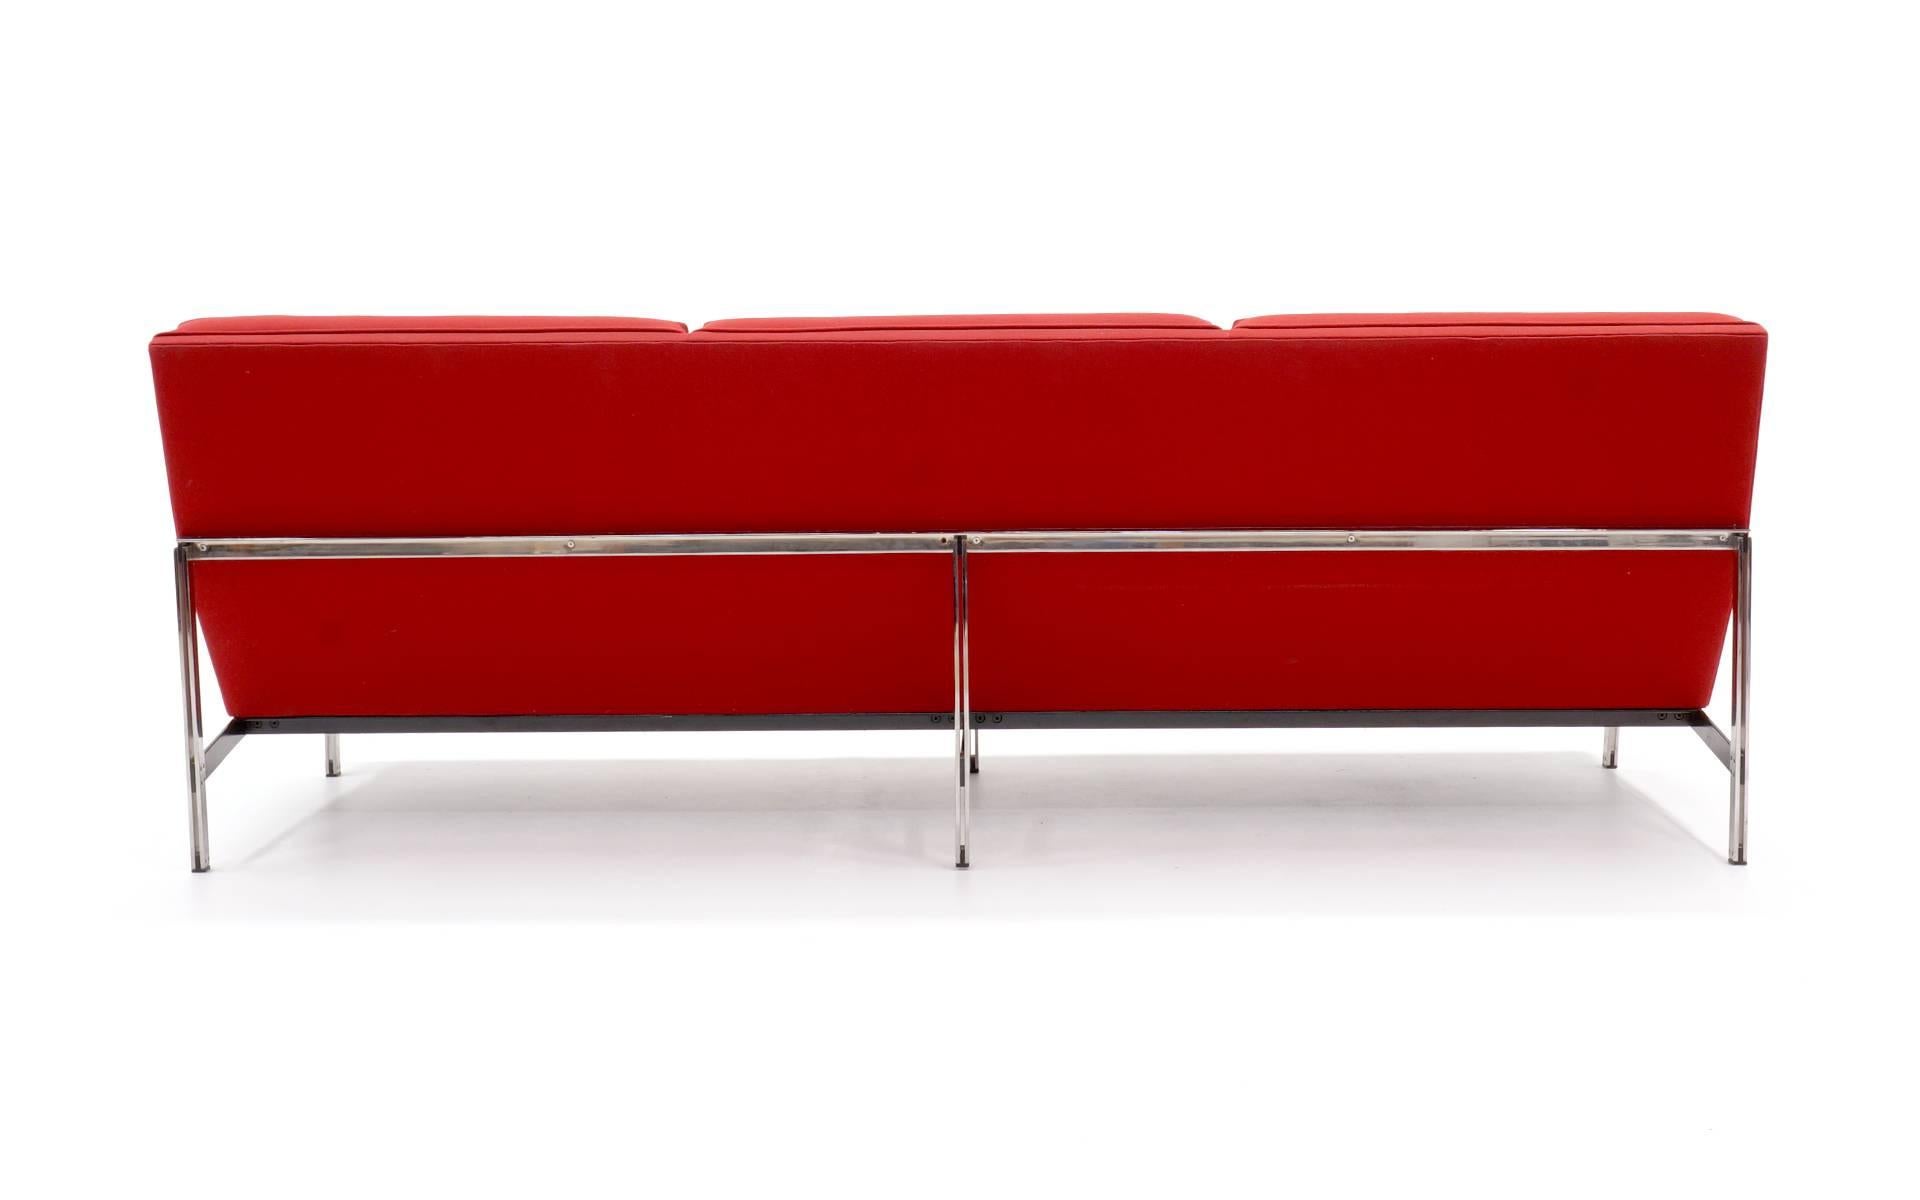 American Florence Knoll Parallel Bar Three-Seat Armless Sofa Red Wool Fabric